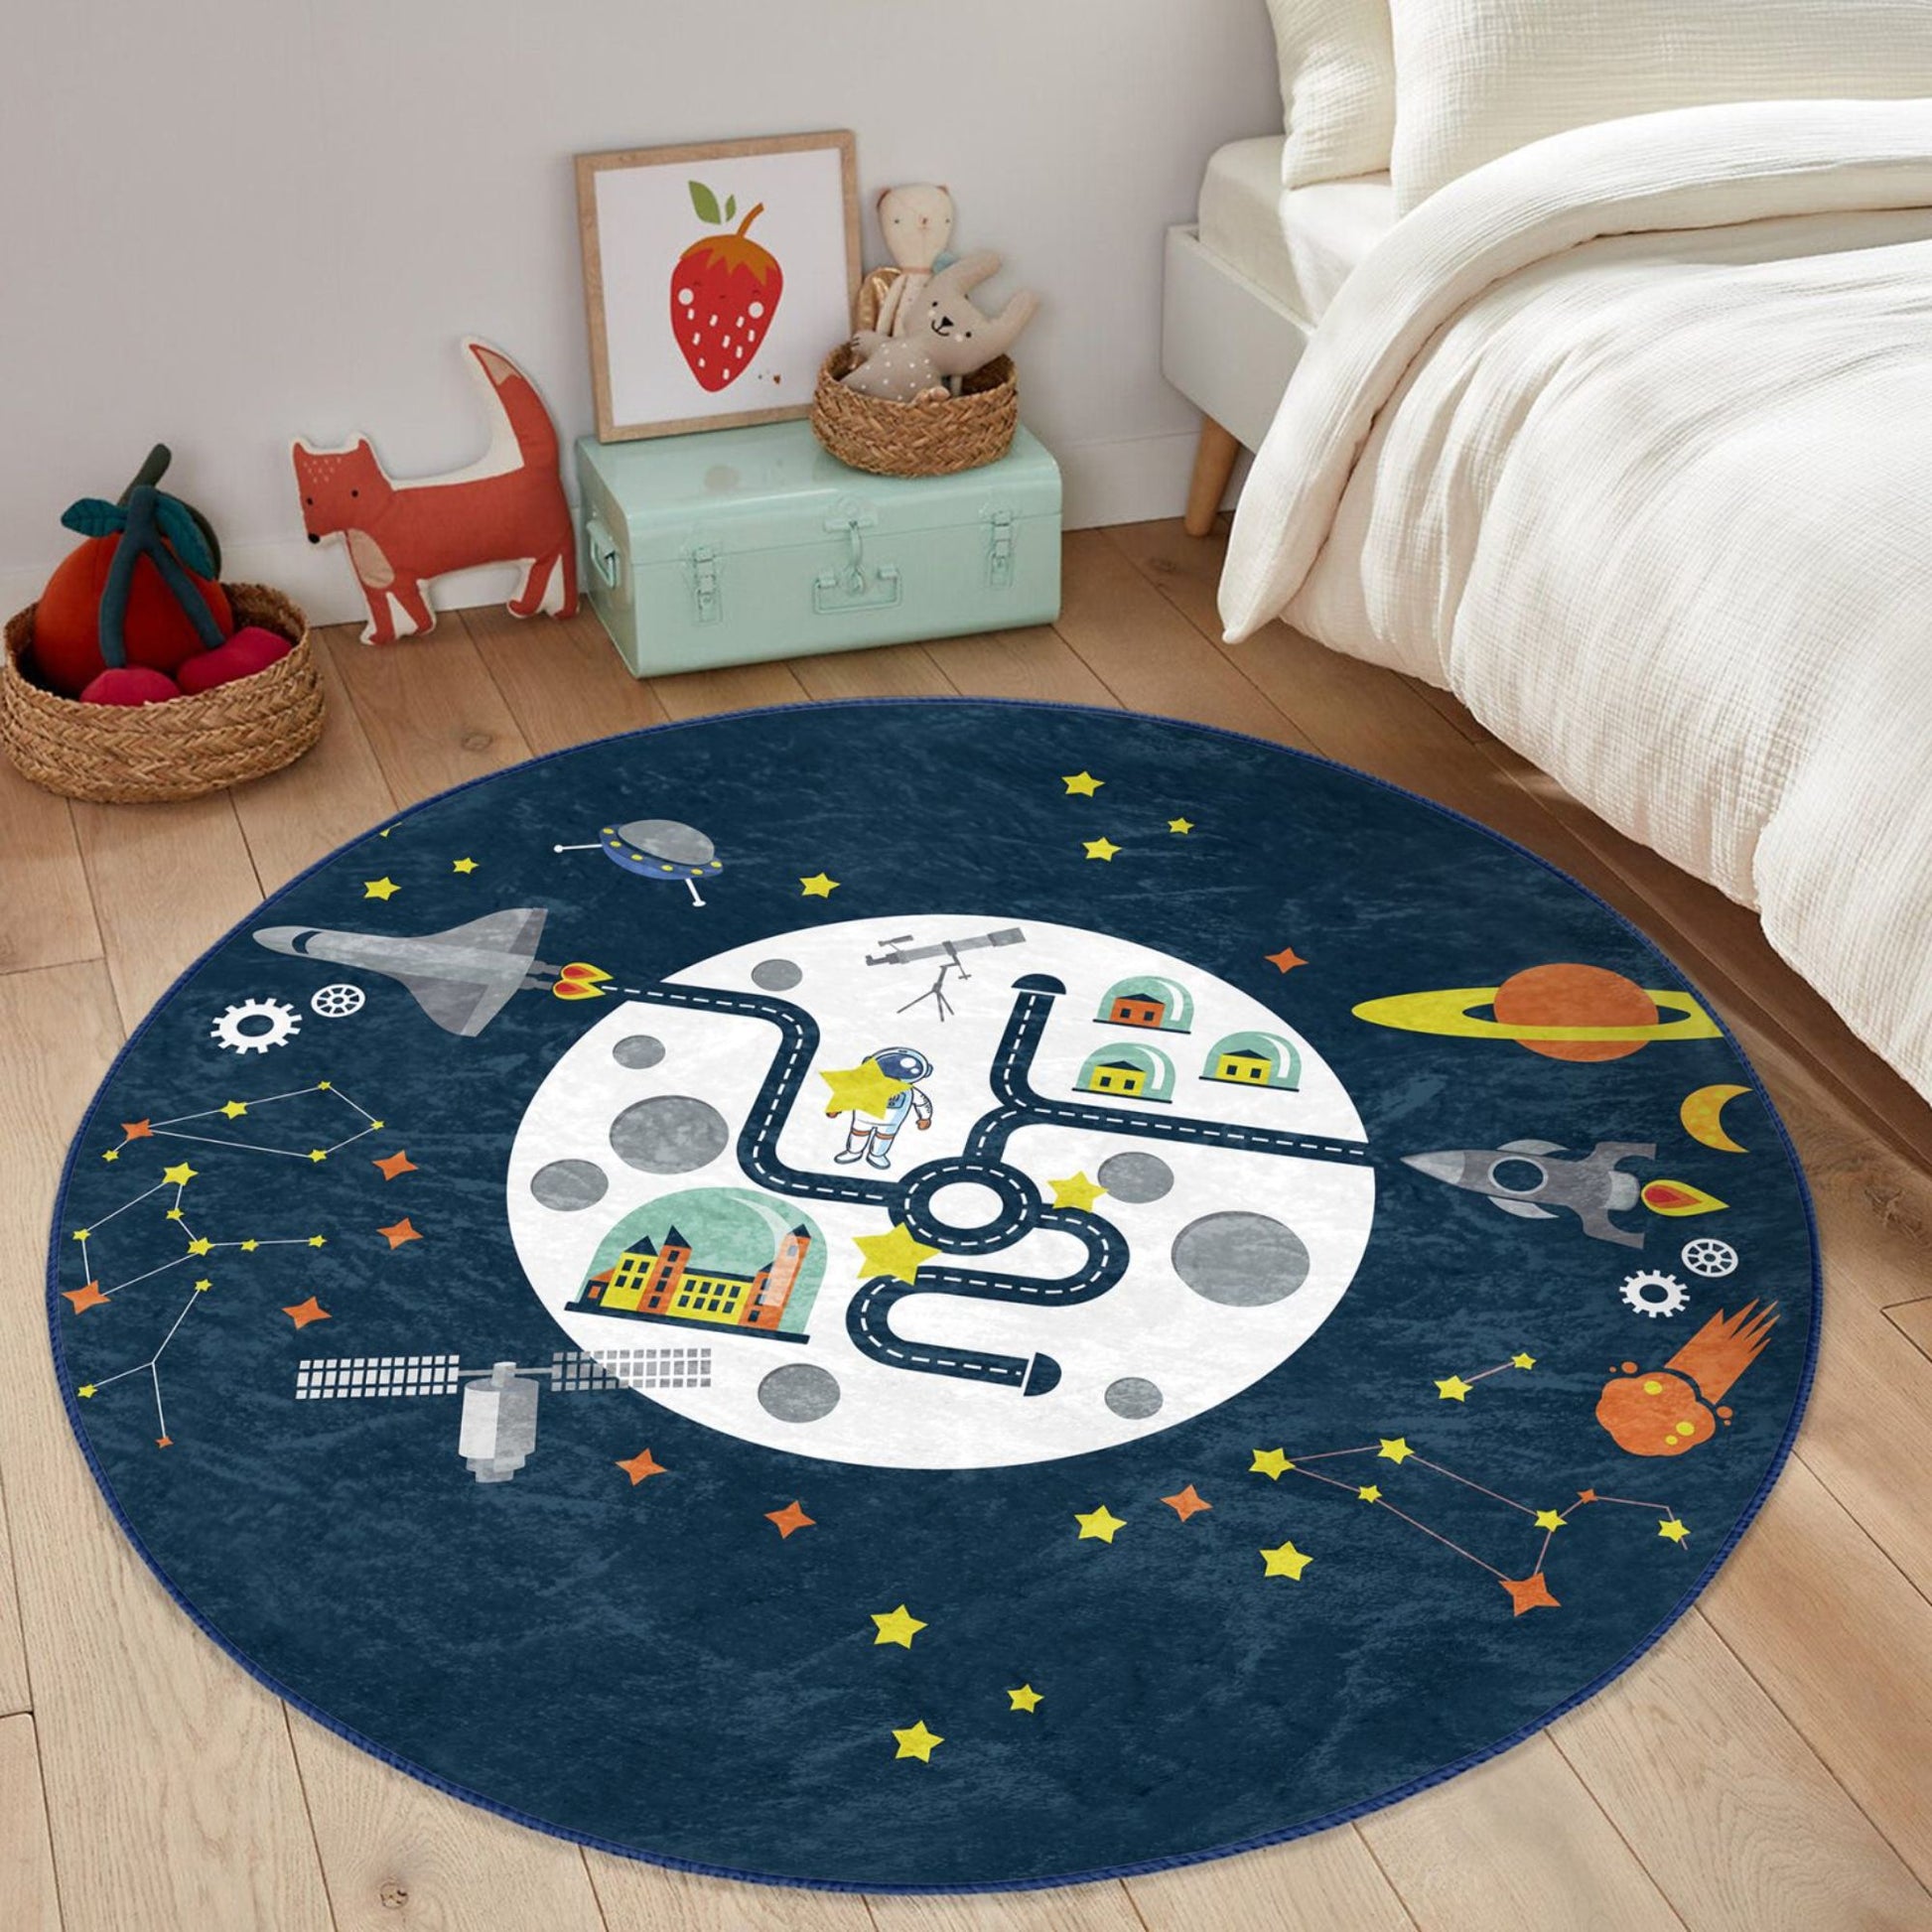 Colorful and Fun Kids' Room Decor for Exploration